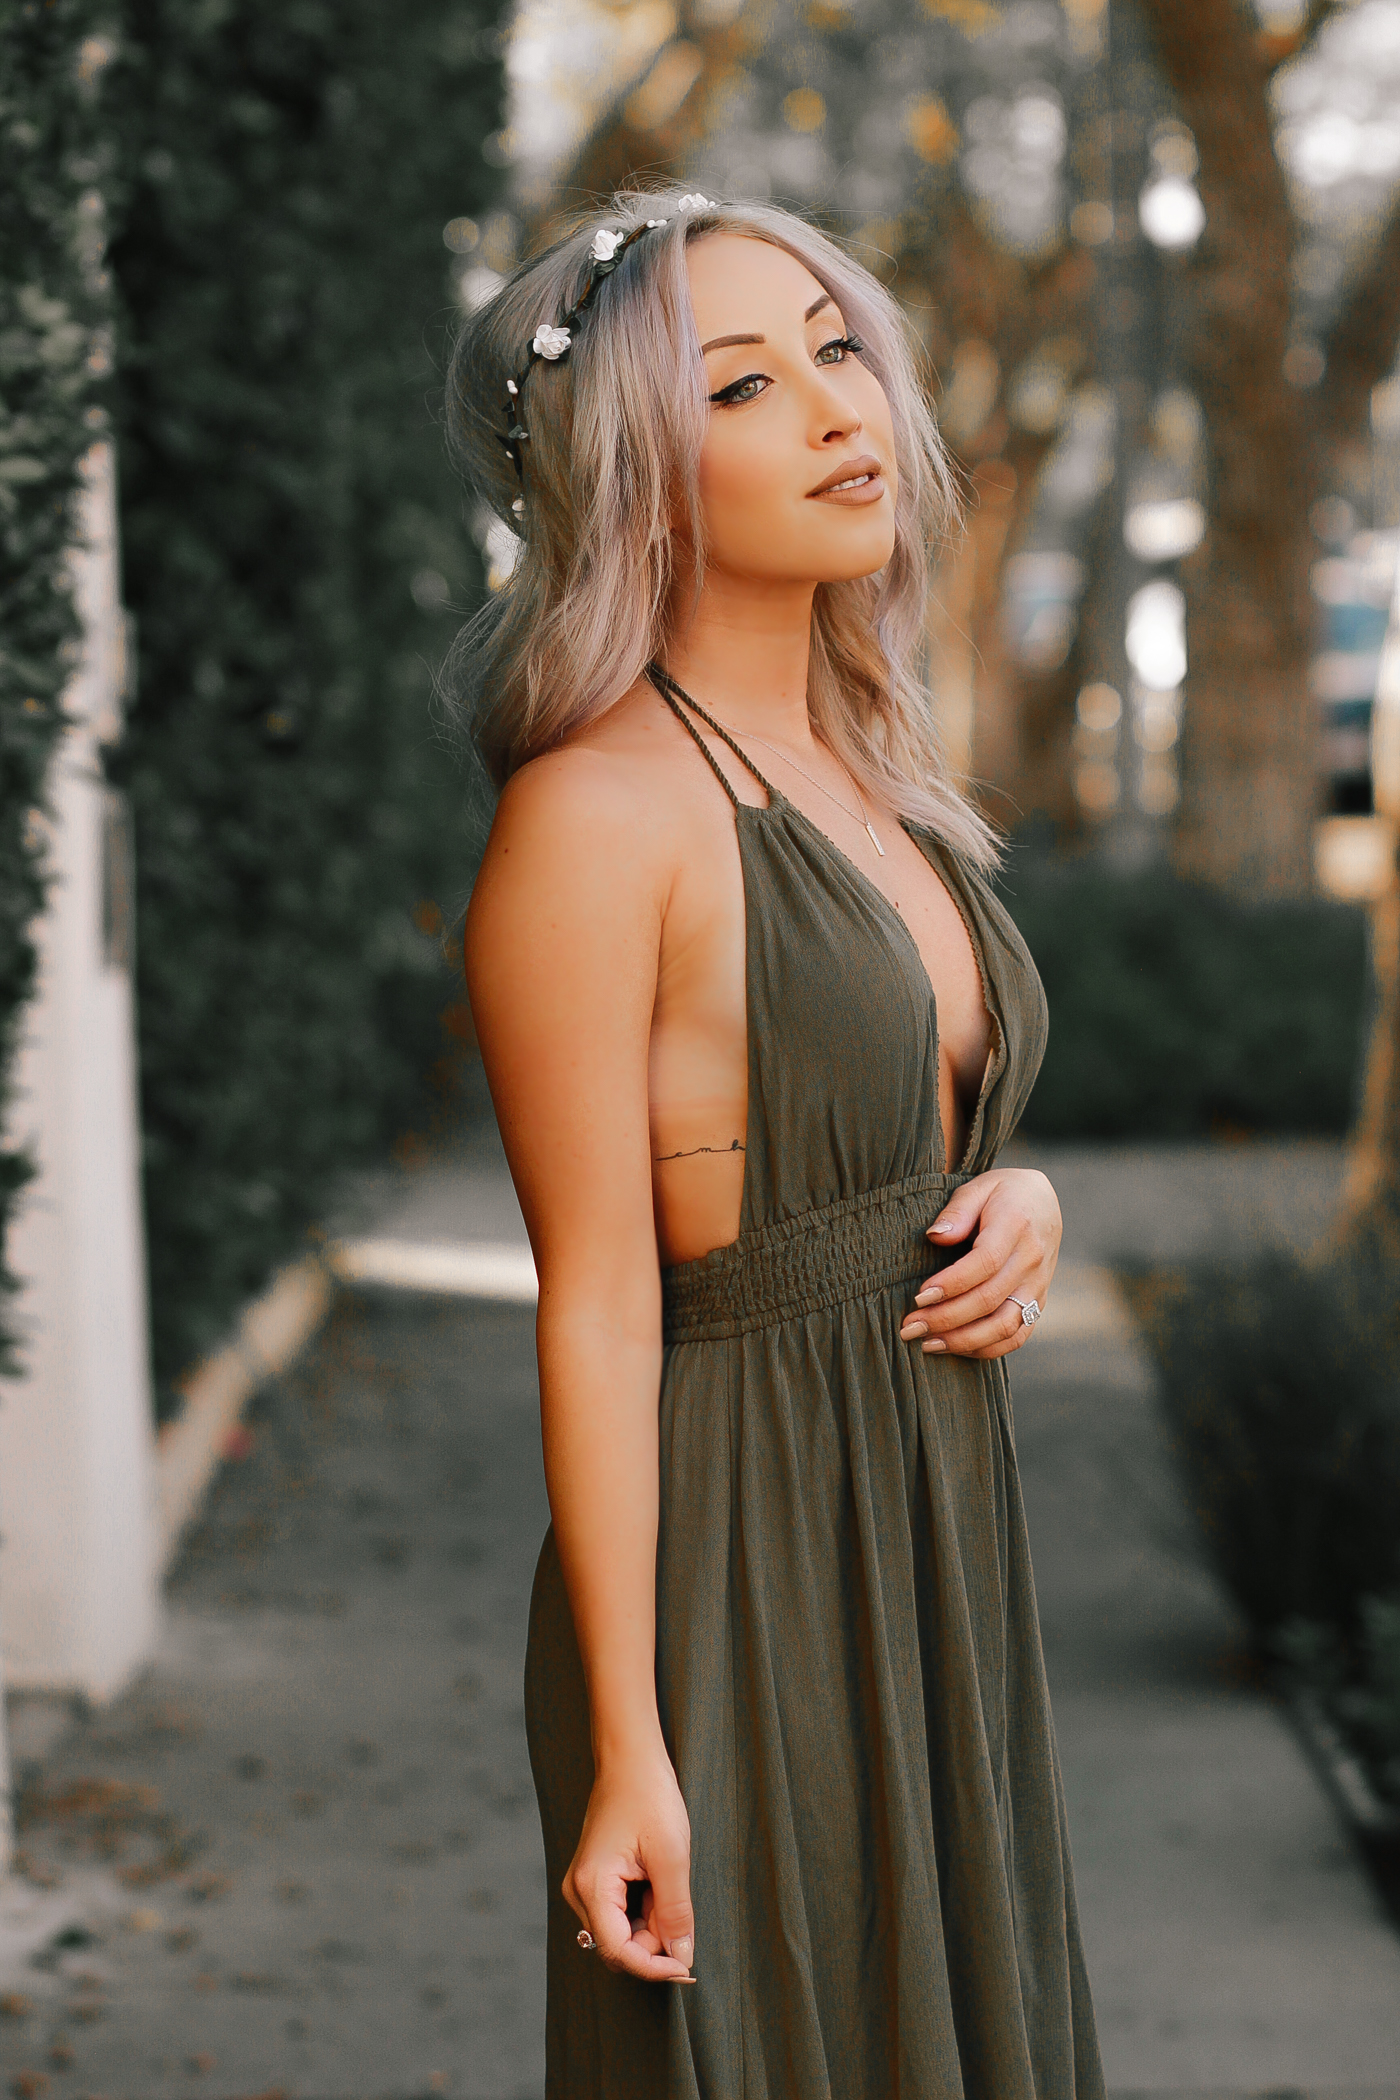 Blondie in the City | Forest Green Maxi Dress @forever21 | Fall Fashion, Boho Style